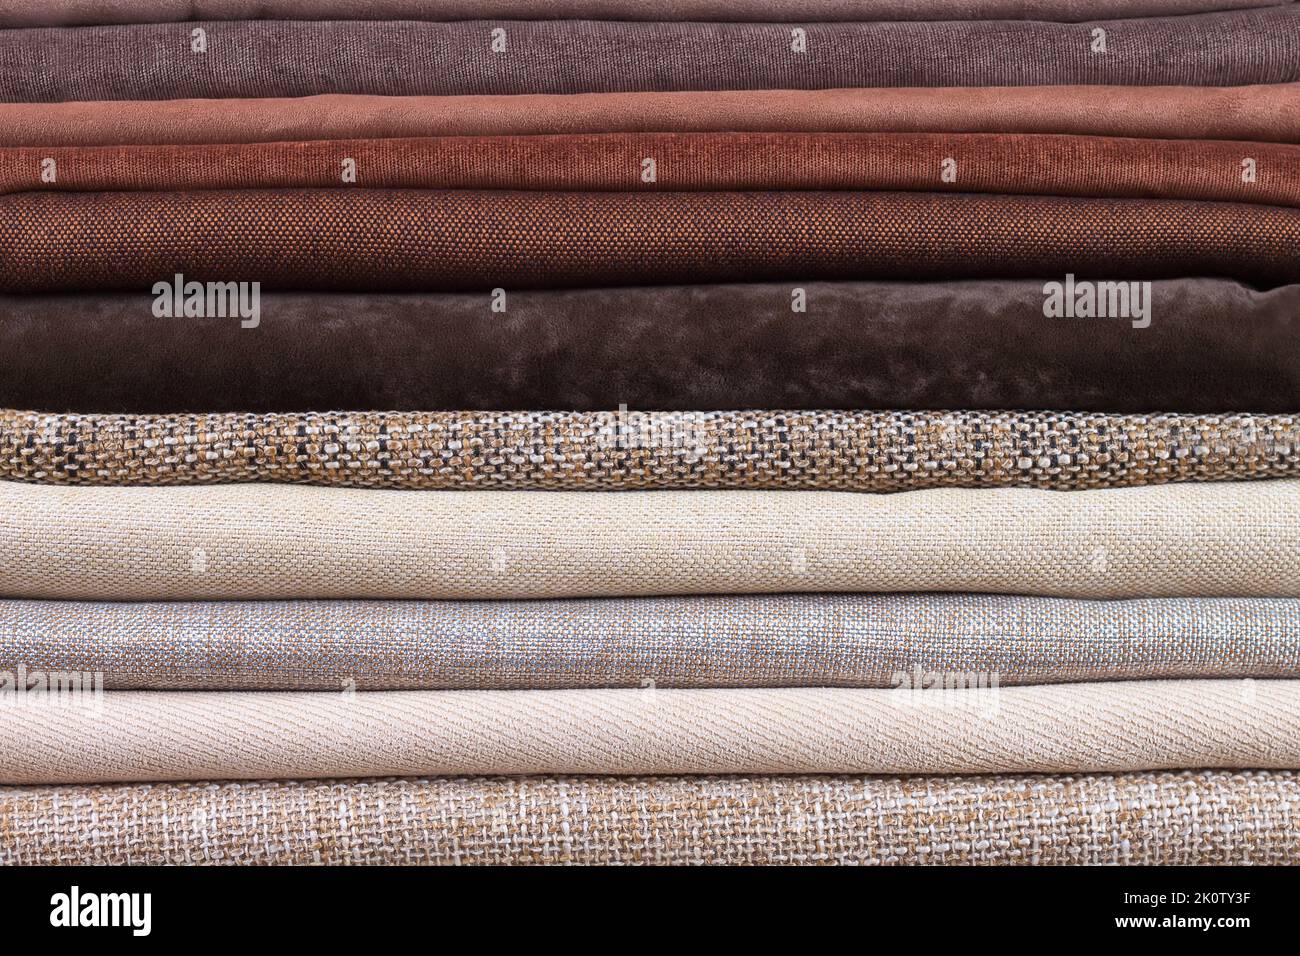 Pile of folded colorful textile. Heap of cloth brown and beige color fabric Stock Photo